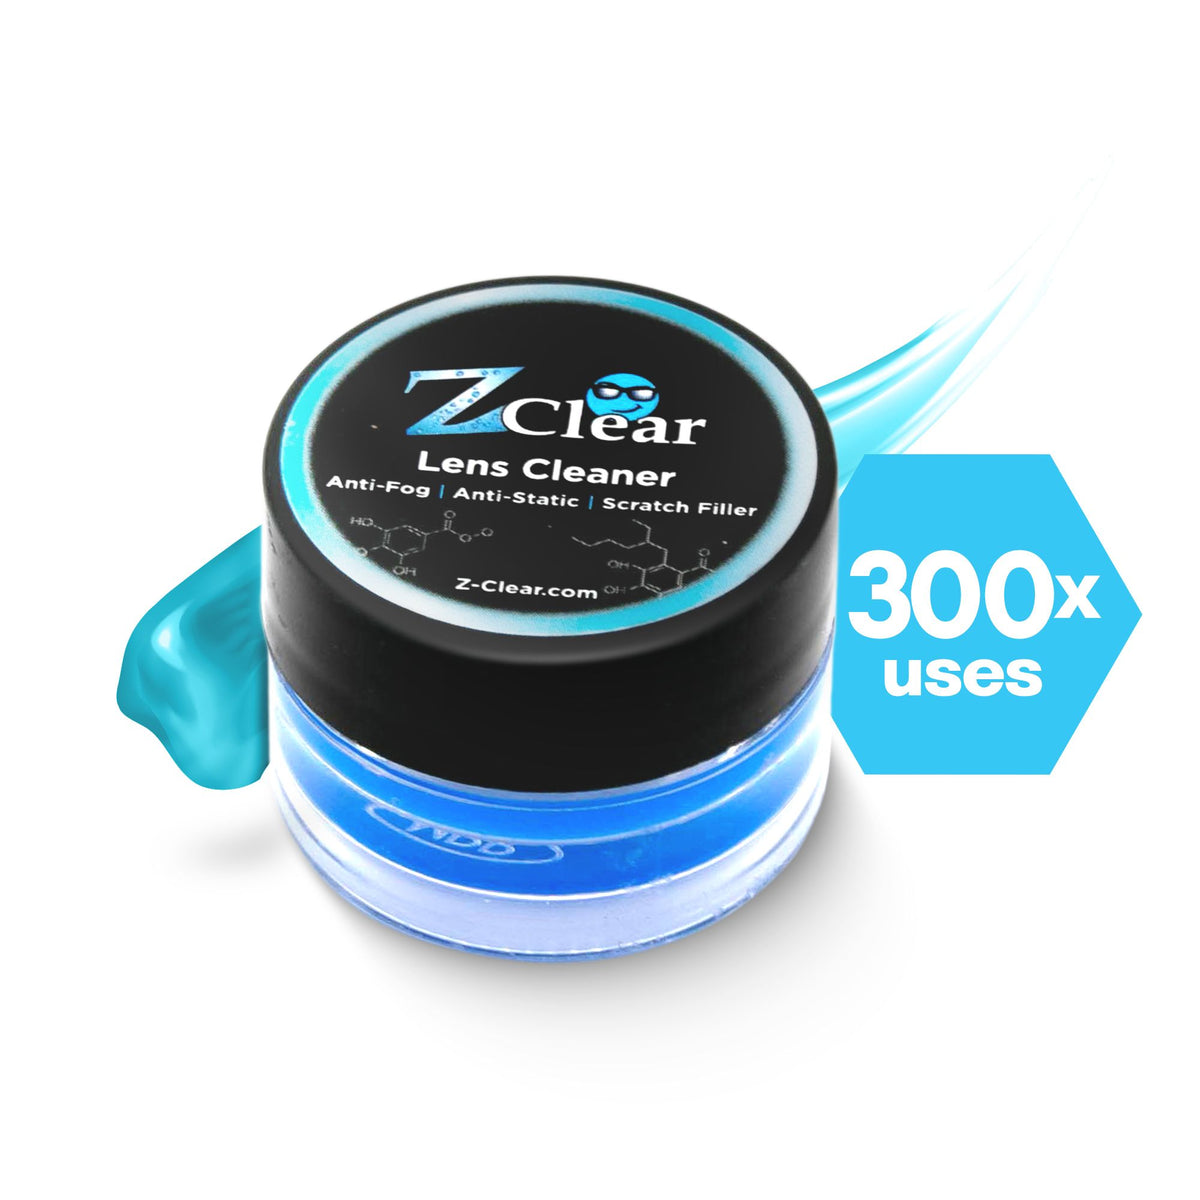 Anti Fog Lens cleaning Paste | Safe for all Lenses | Made in USA + With Microfiber Cloth